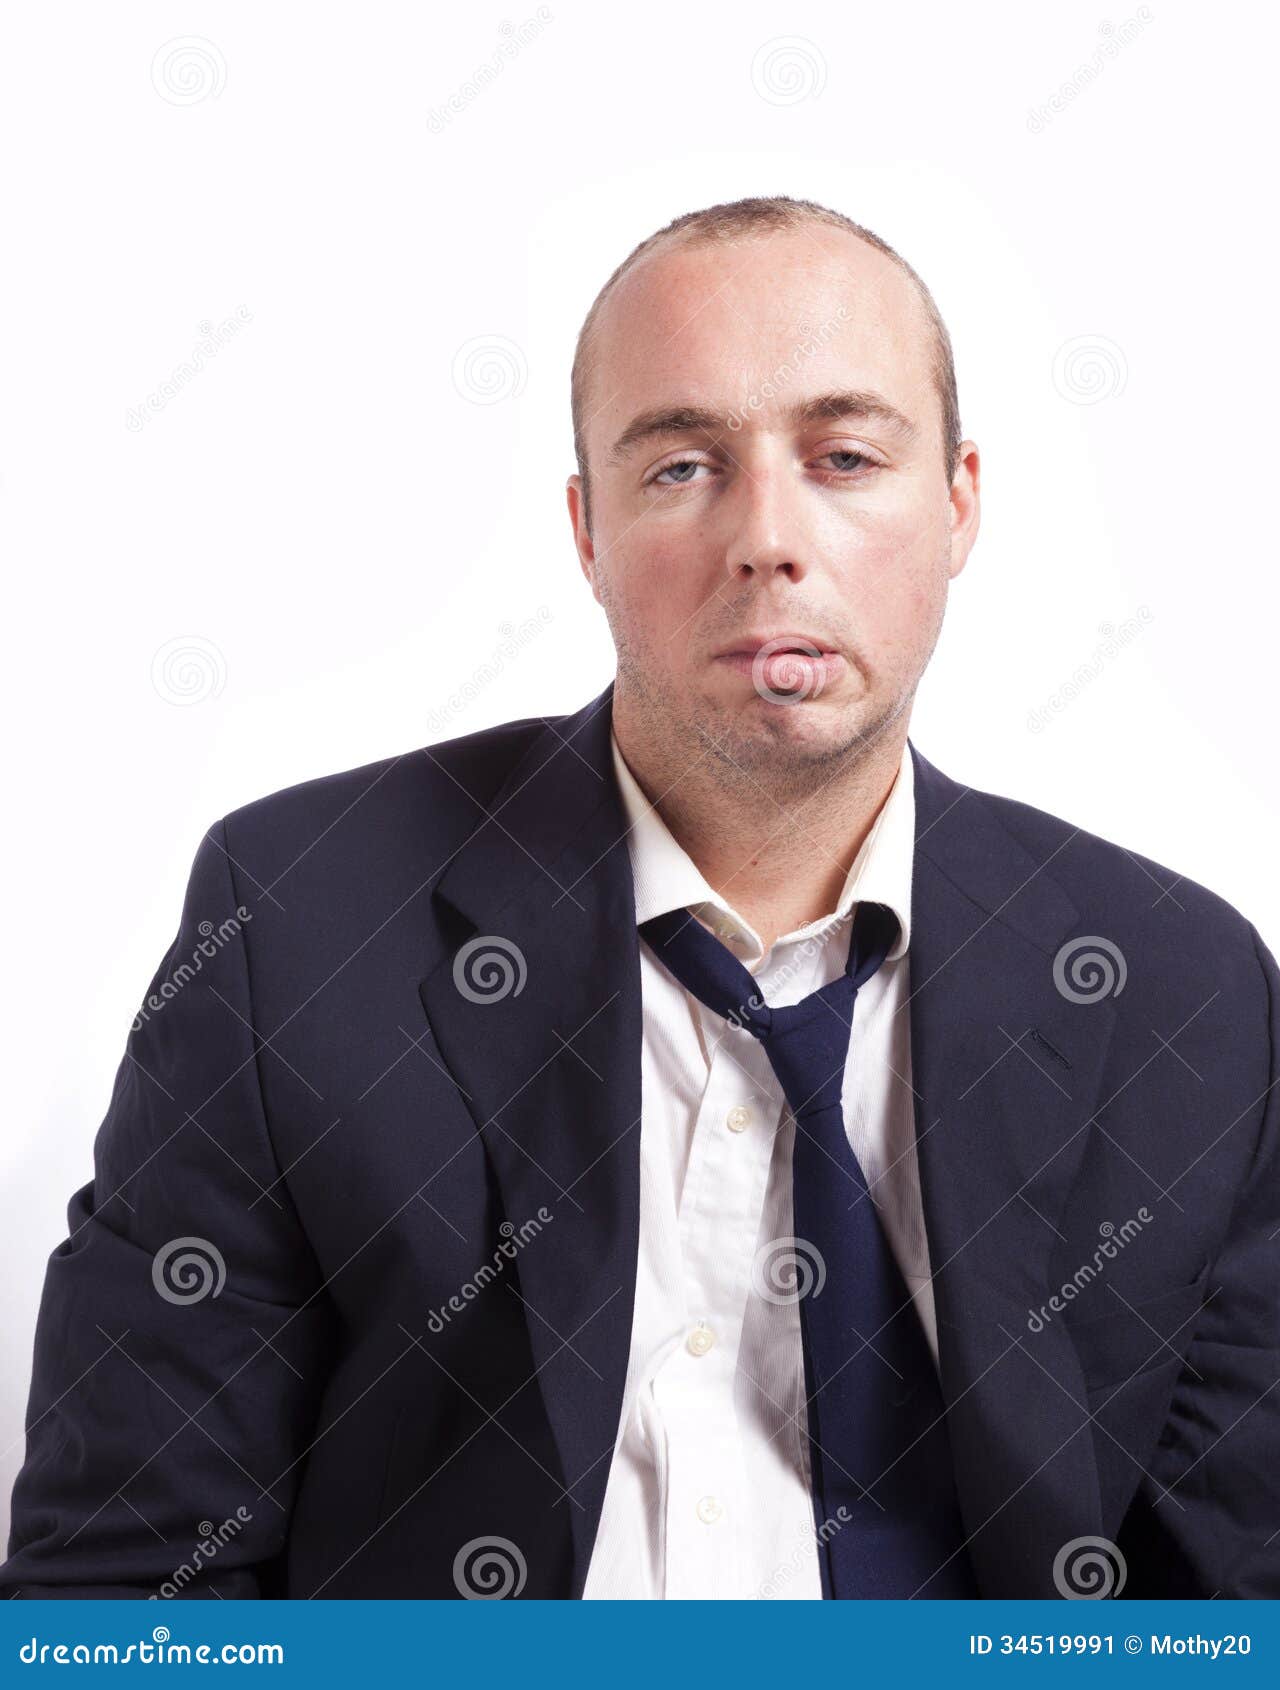 Ugly Face stock image. Image of gross, human, caucasian - 34519991